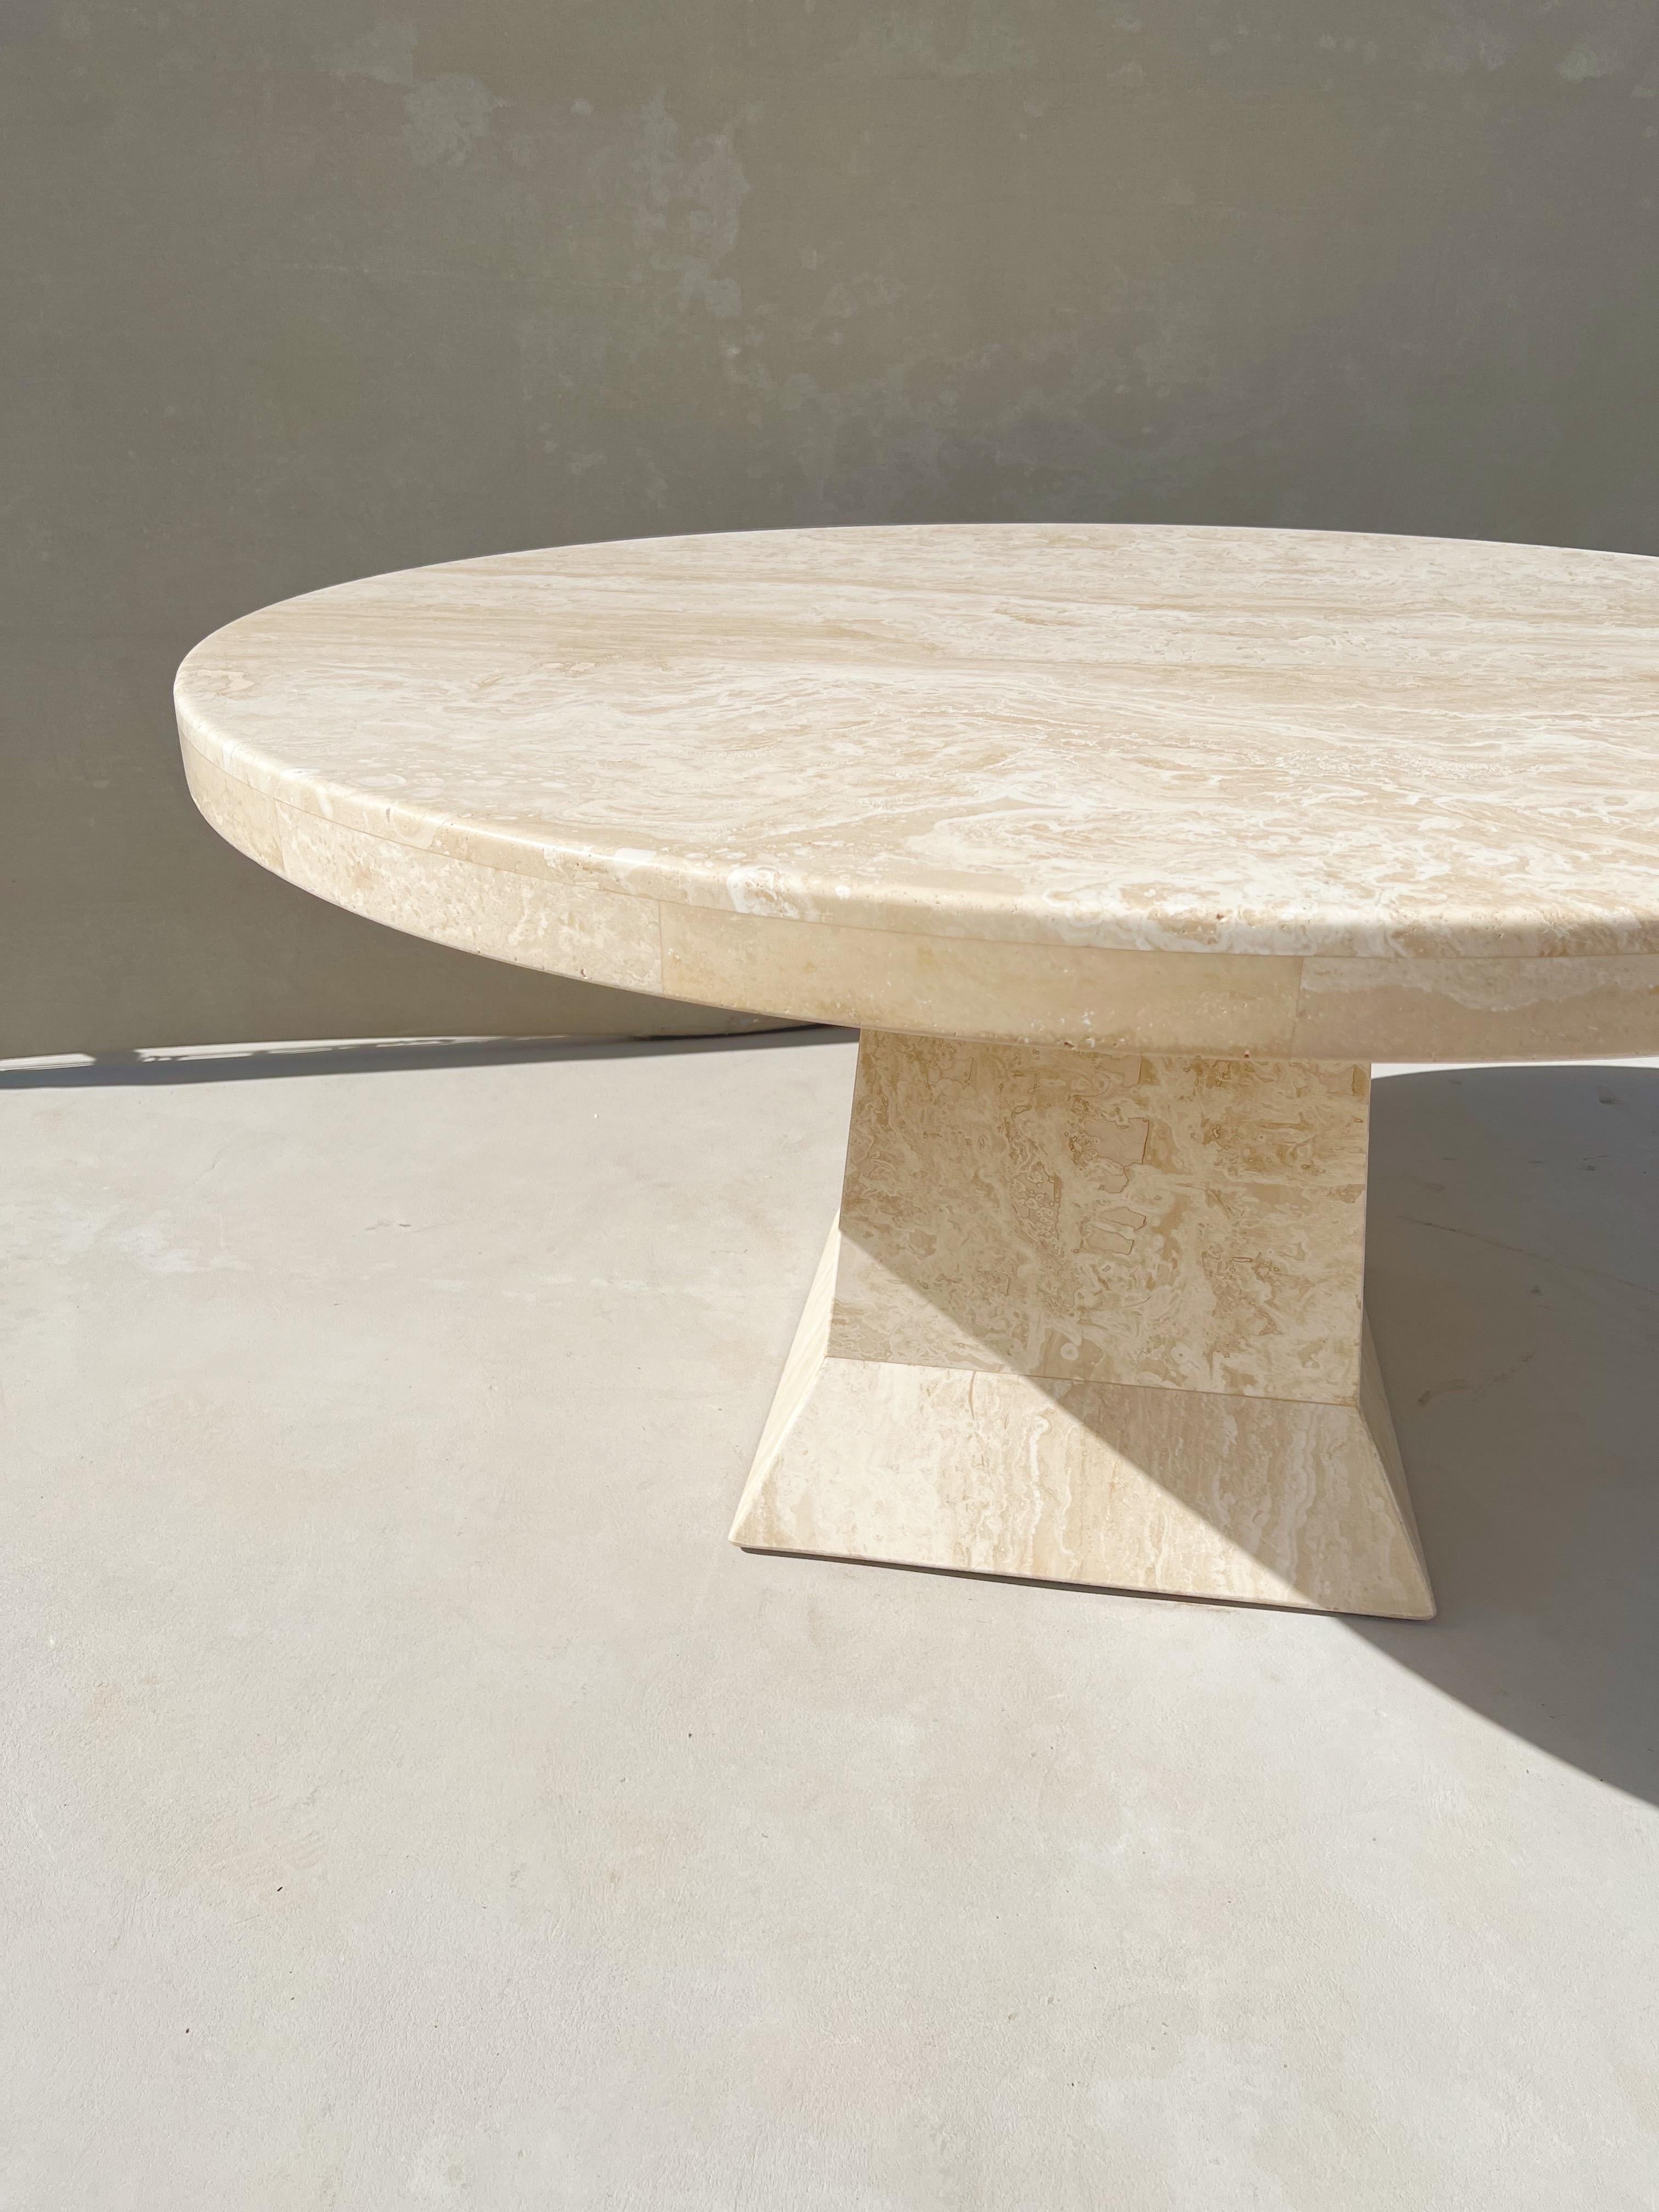 Hand-Crafted Vintage Modern Italian Travertine Round Dining Table with a Sculptural Base